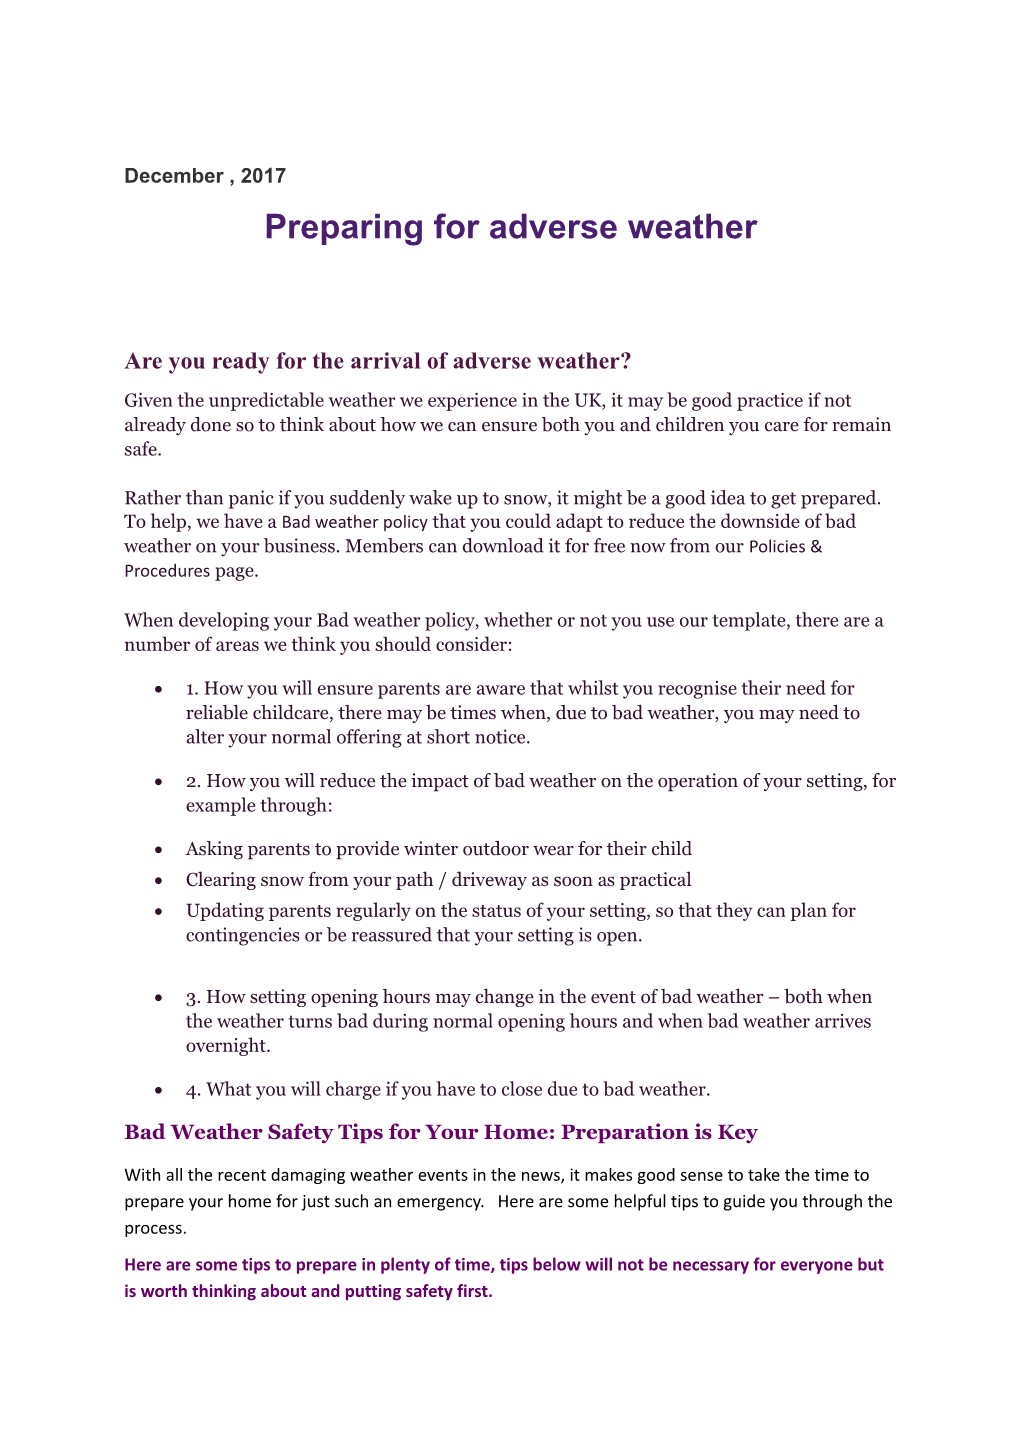 Are You Ready for the Arrival of Adverse Weather?